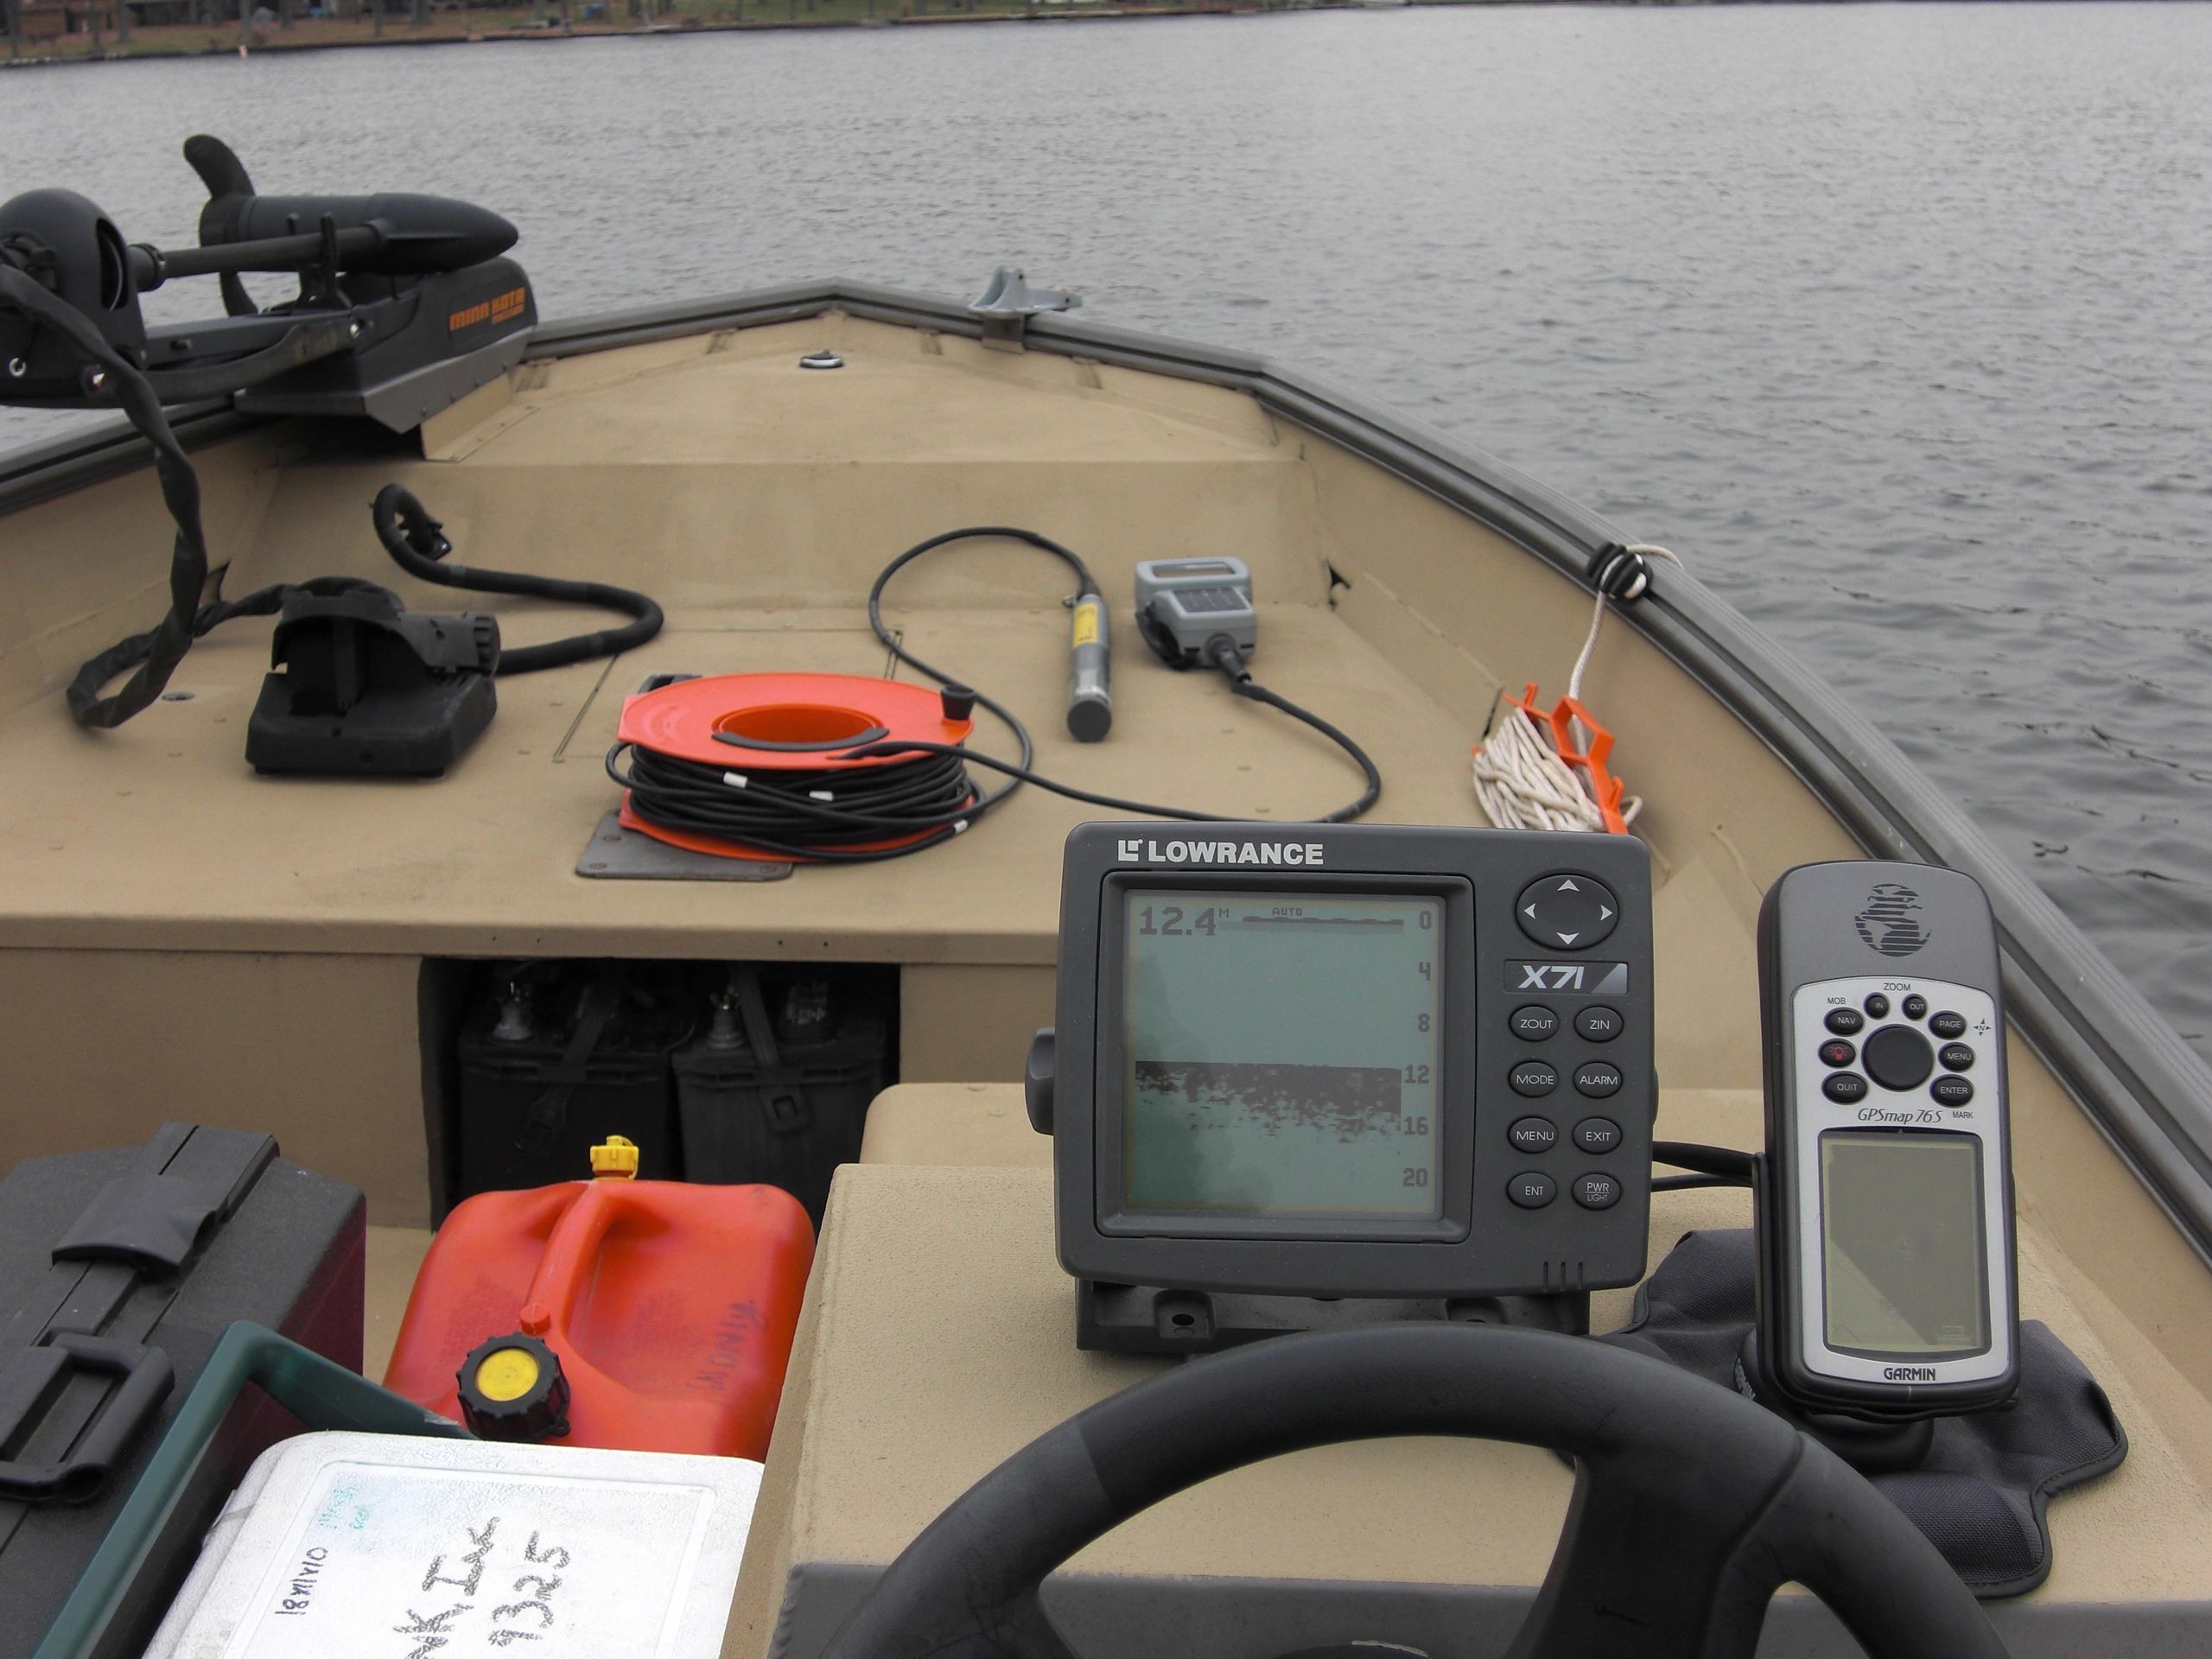 Aqua Link pond and lake management company - one of our lake monitoring boats 